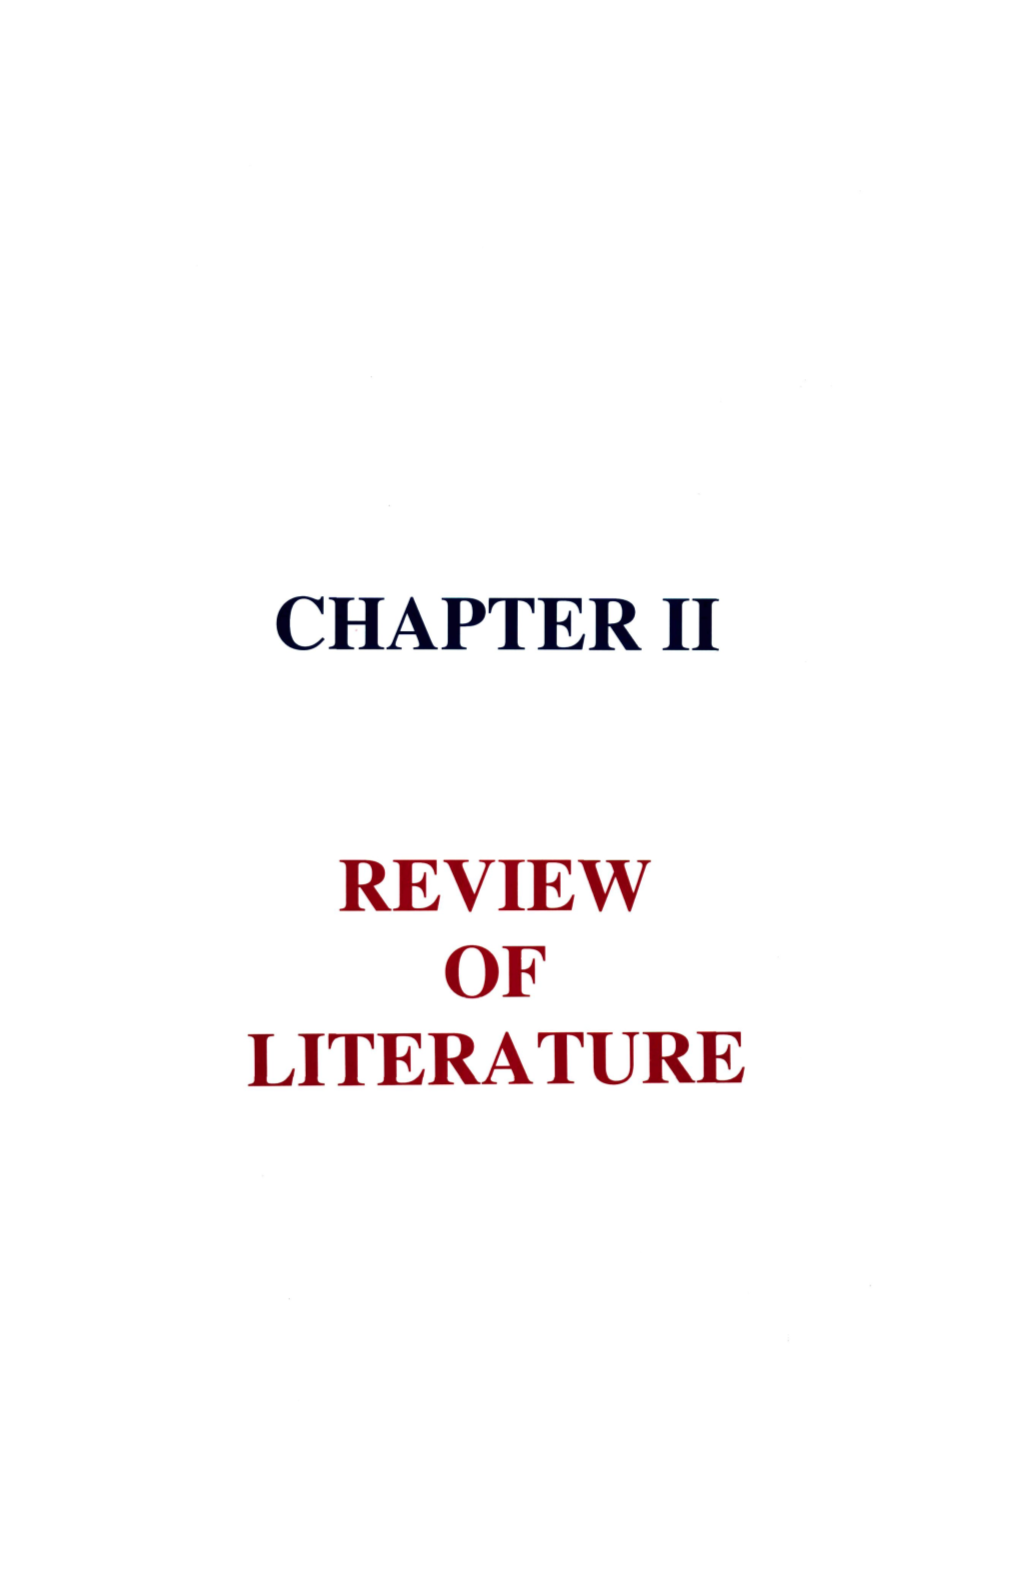 Chapter Ii Review of Literature